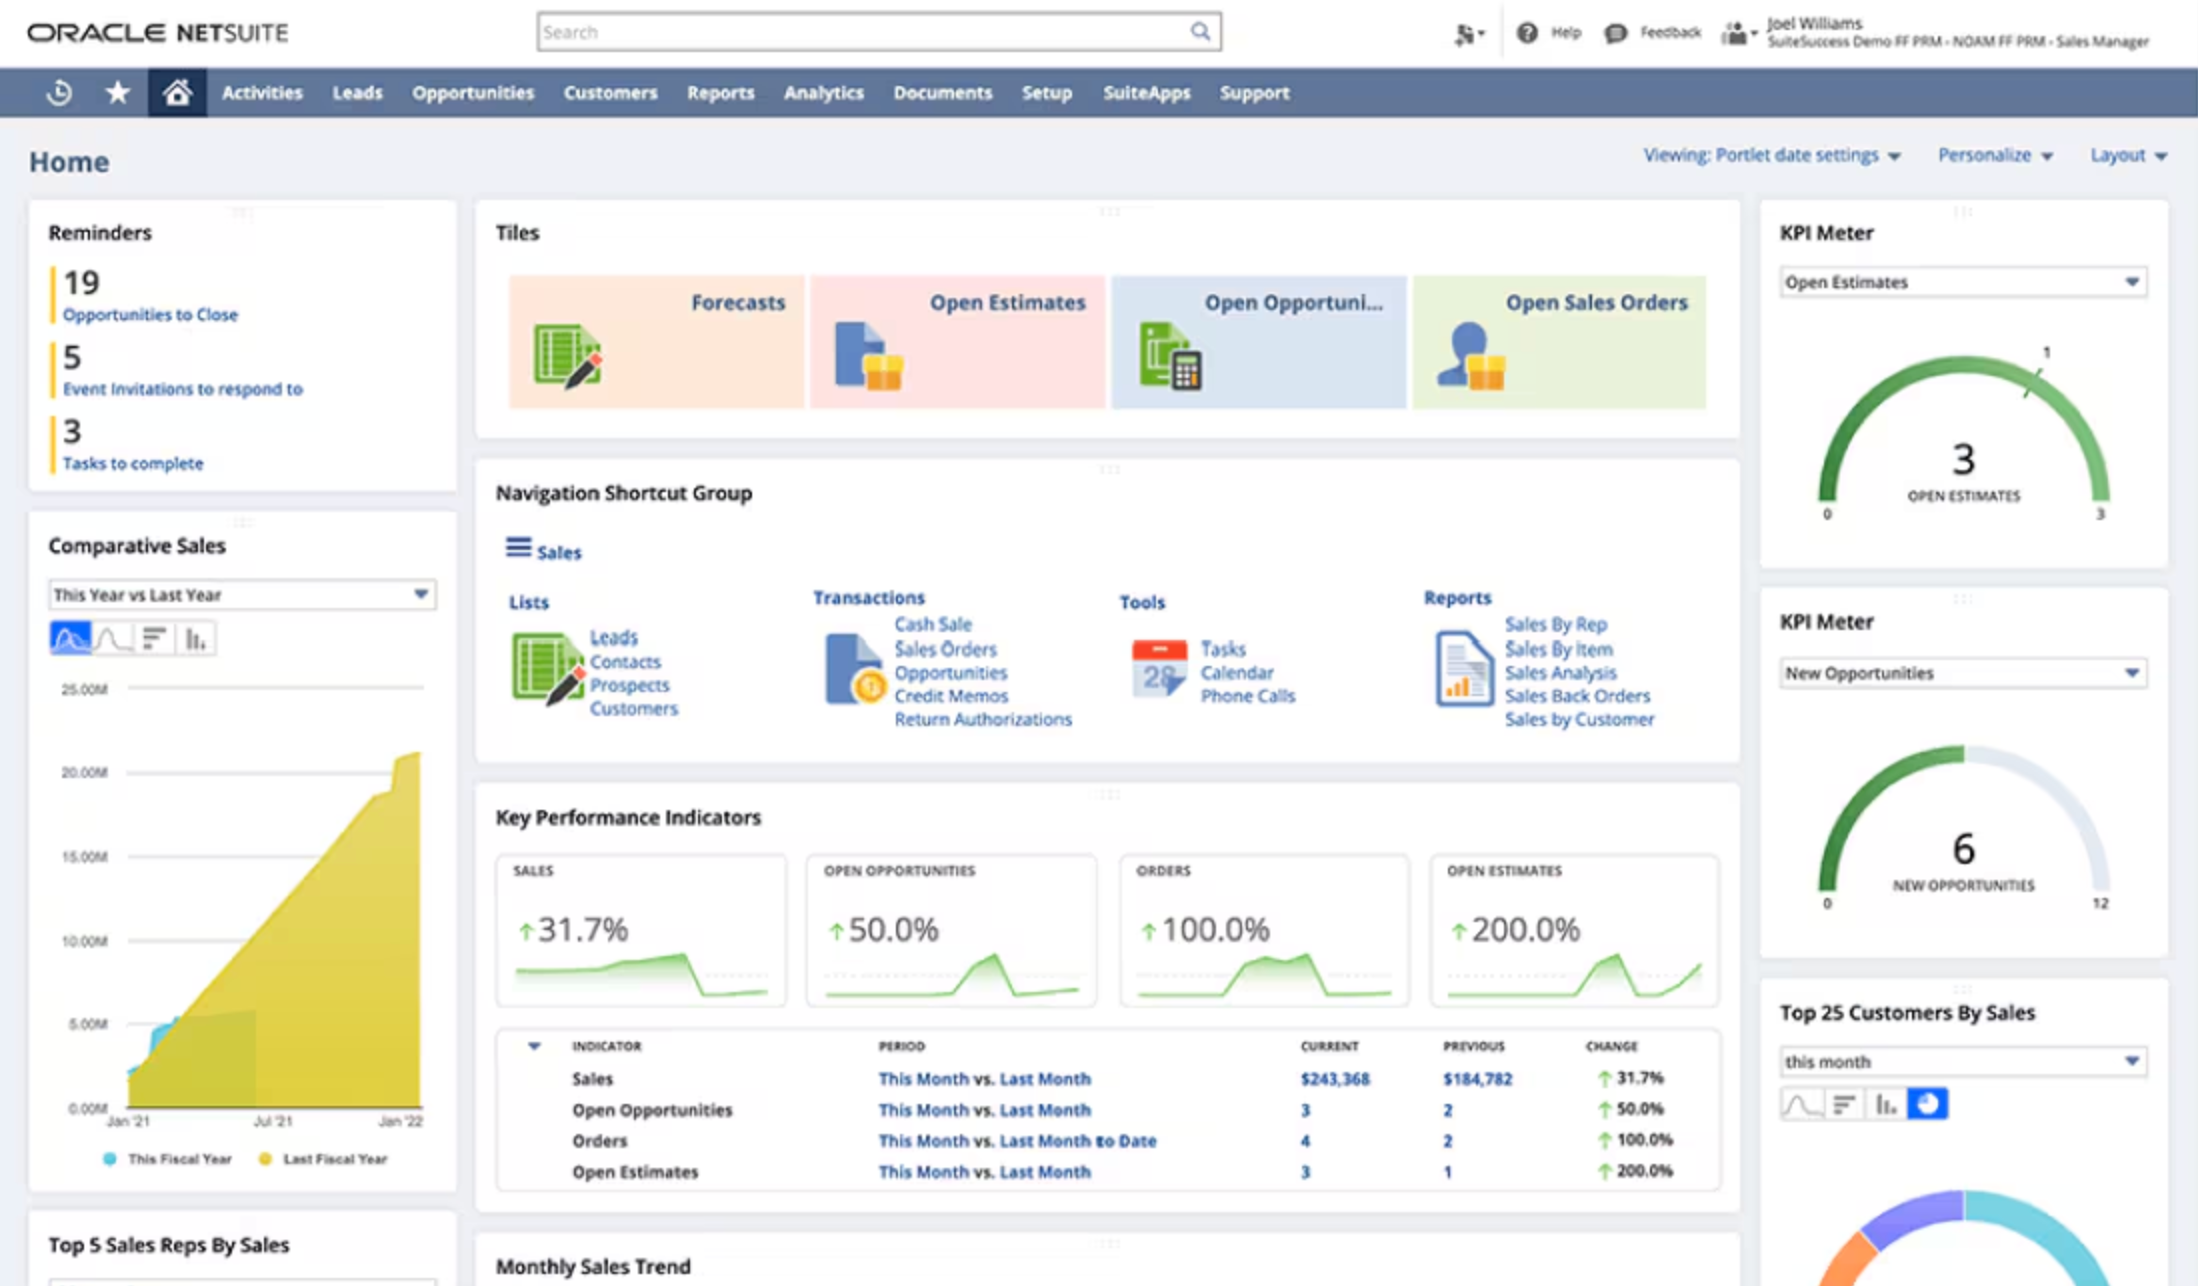 Oracle NetSuite reporting dashboard